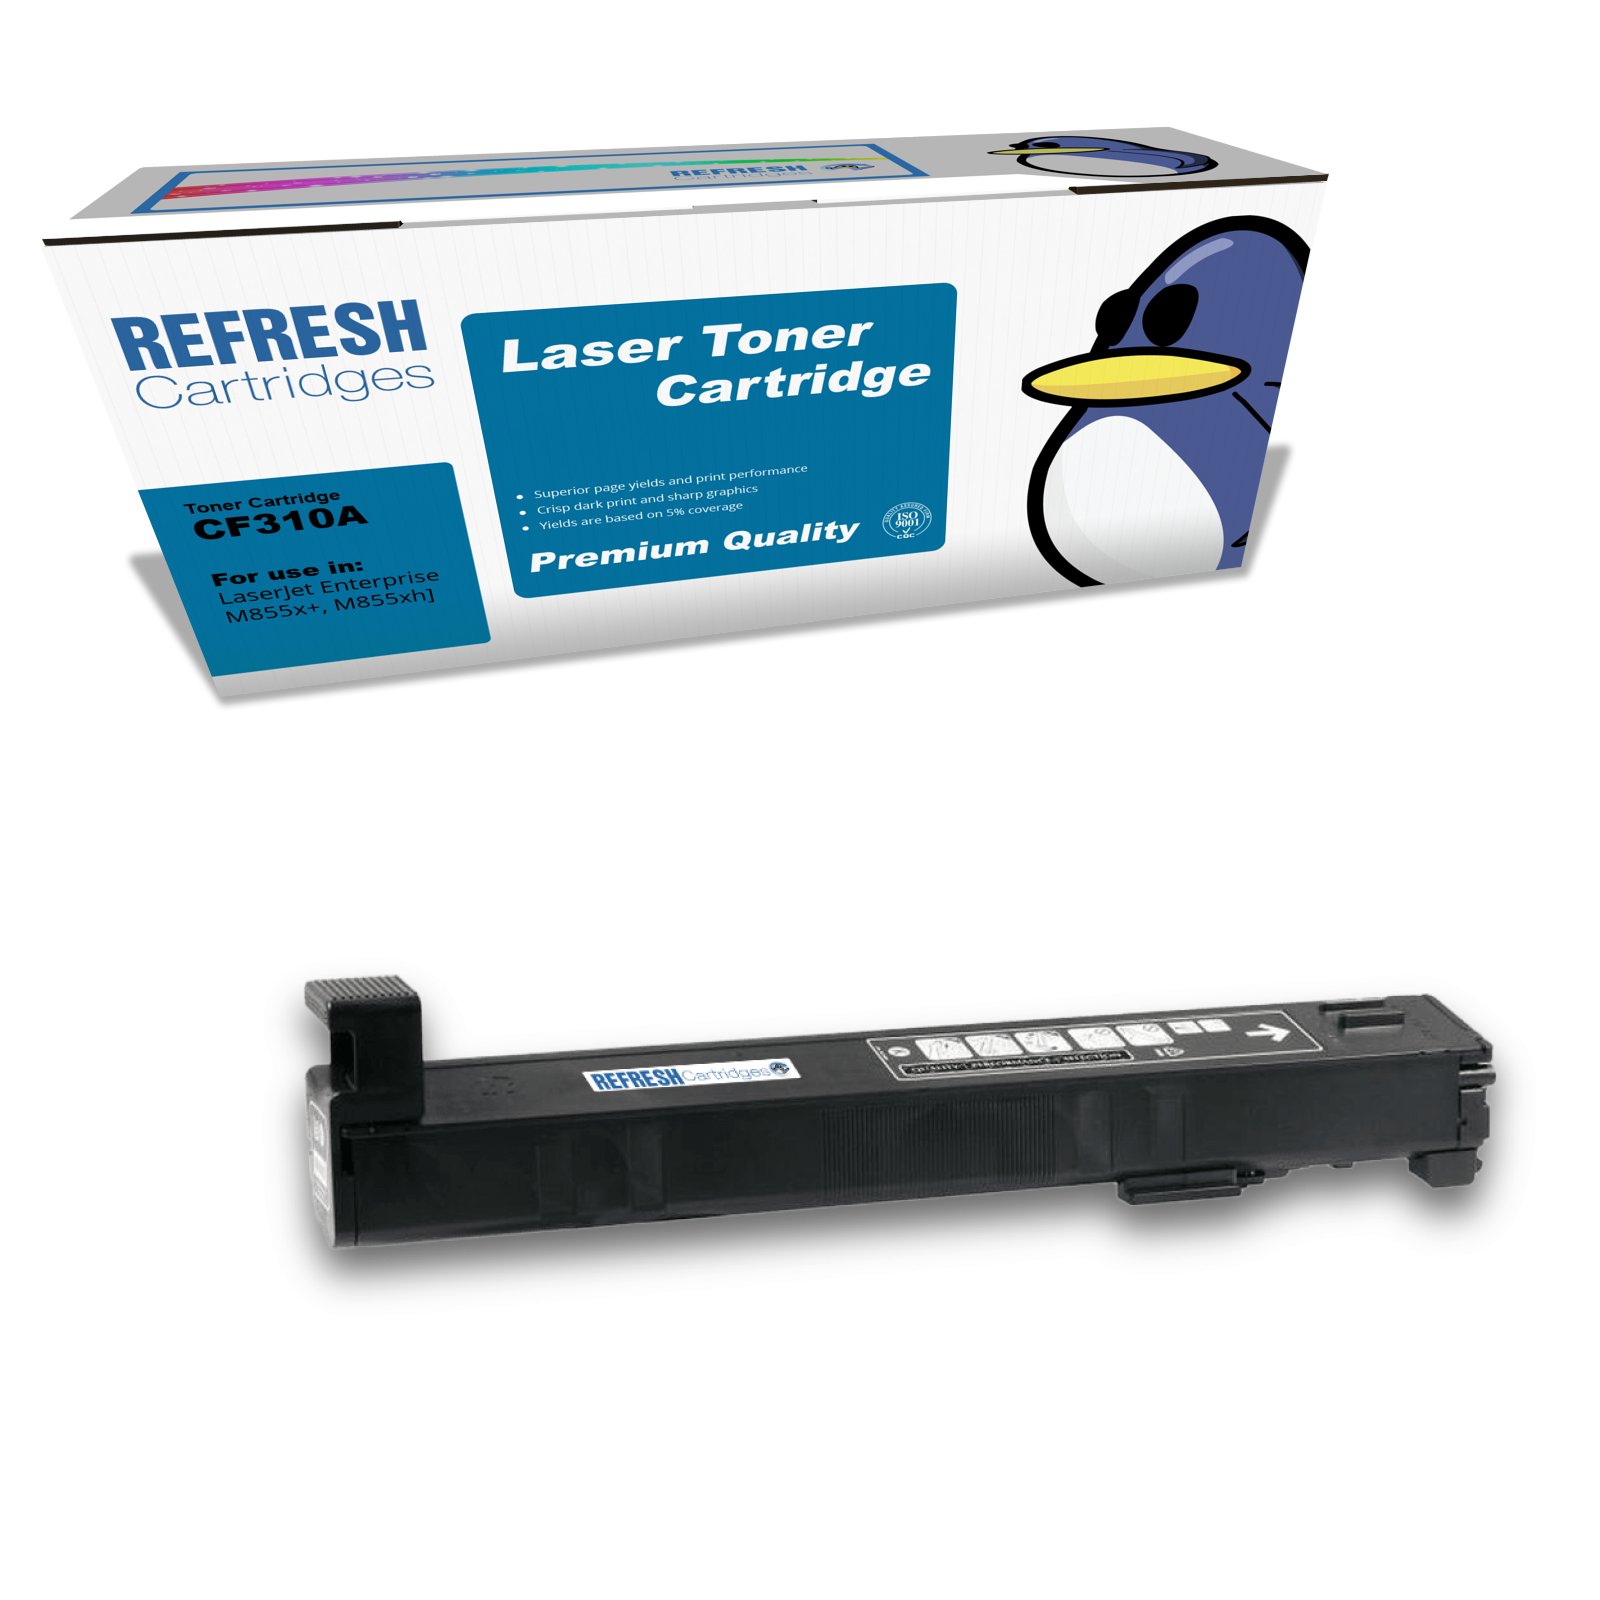 Remanufactured 826A (CF310A) Black Toner Cartridge Replacement for HP Printers